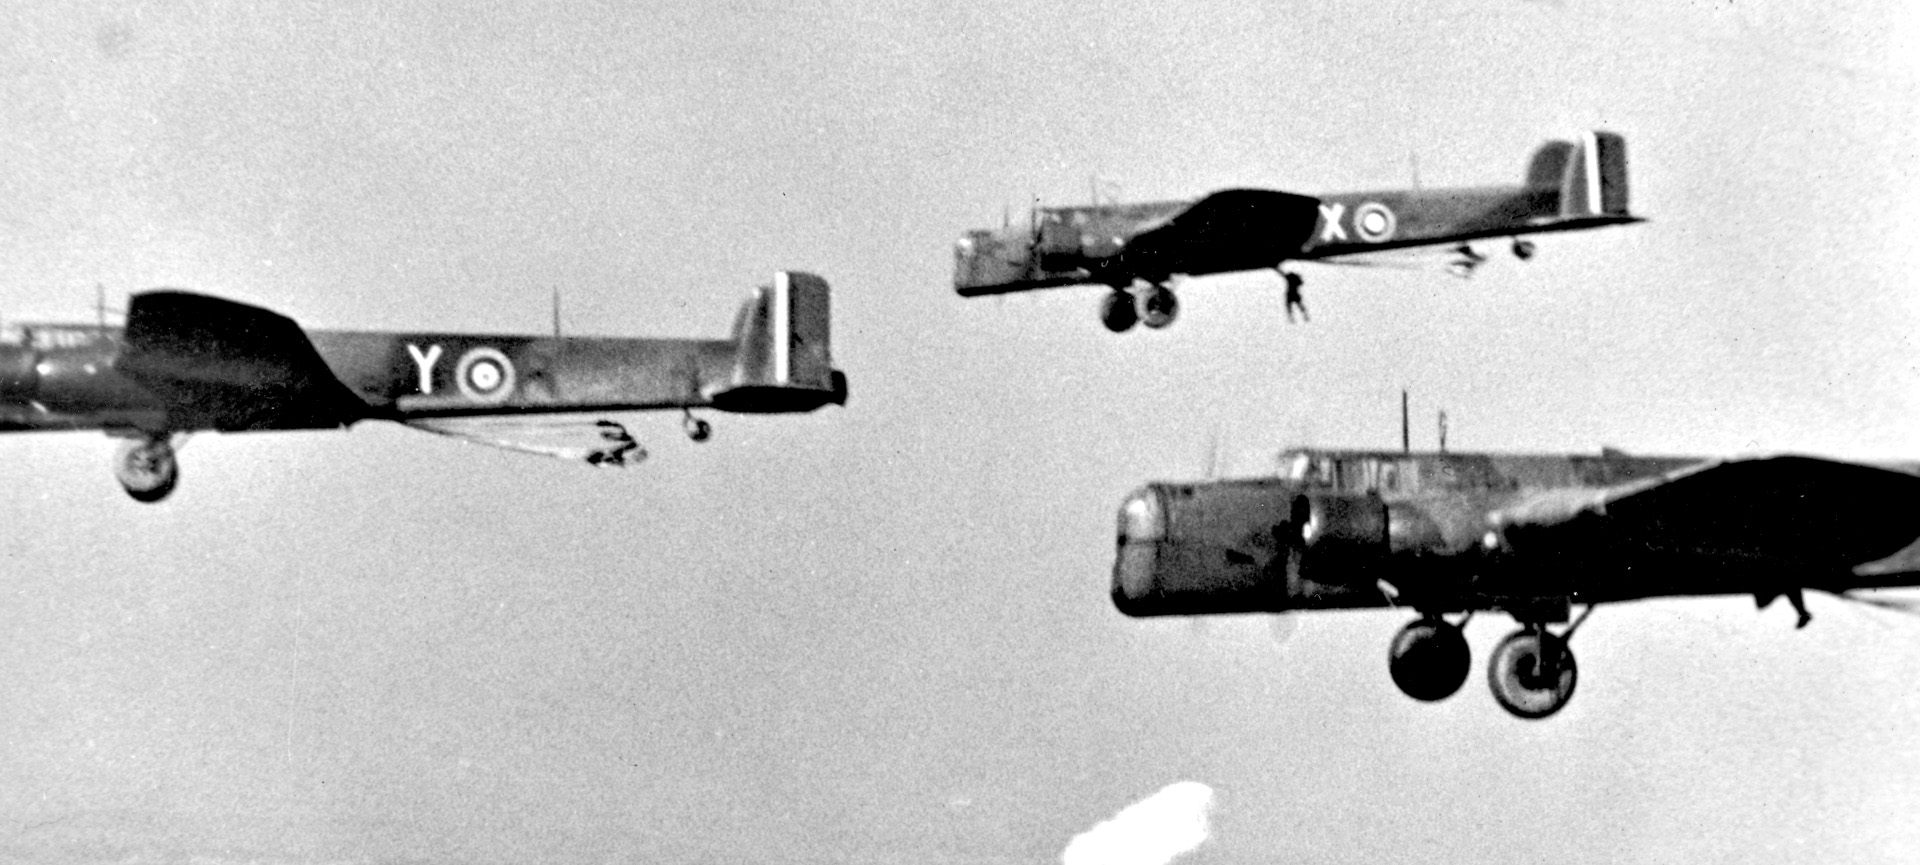 Royal Air Force Whitleys fly across the Bruneval drop zone. A commando is seen leaving the plane in the distance.